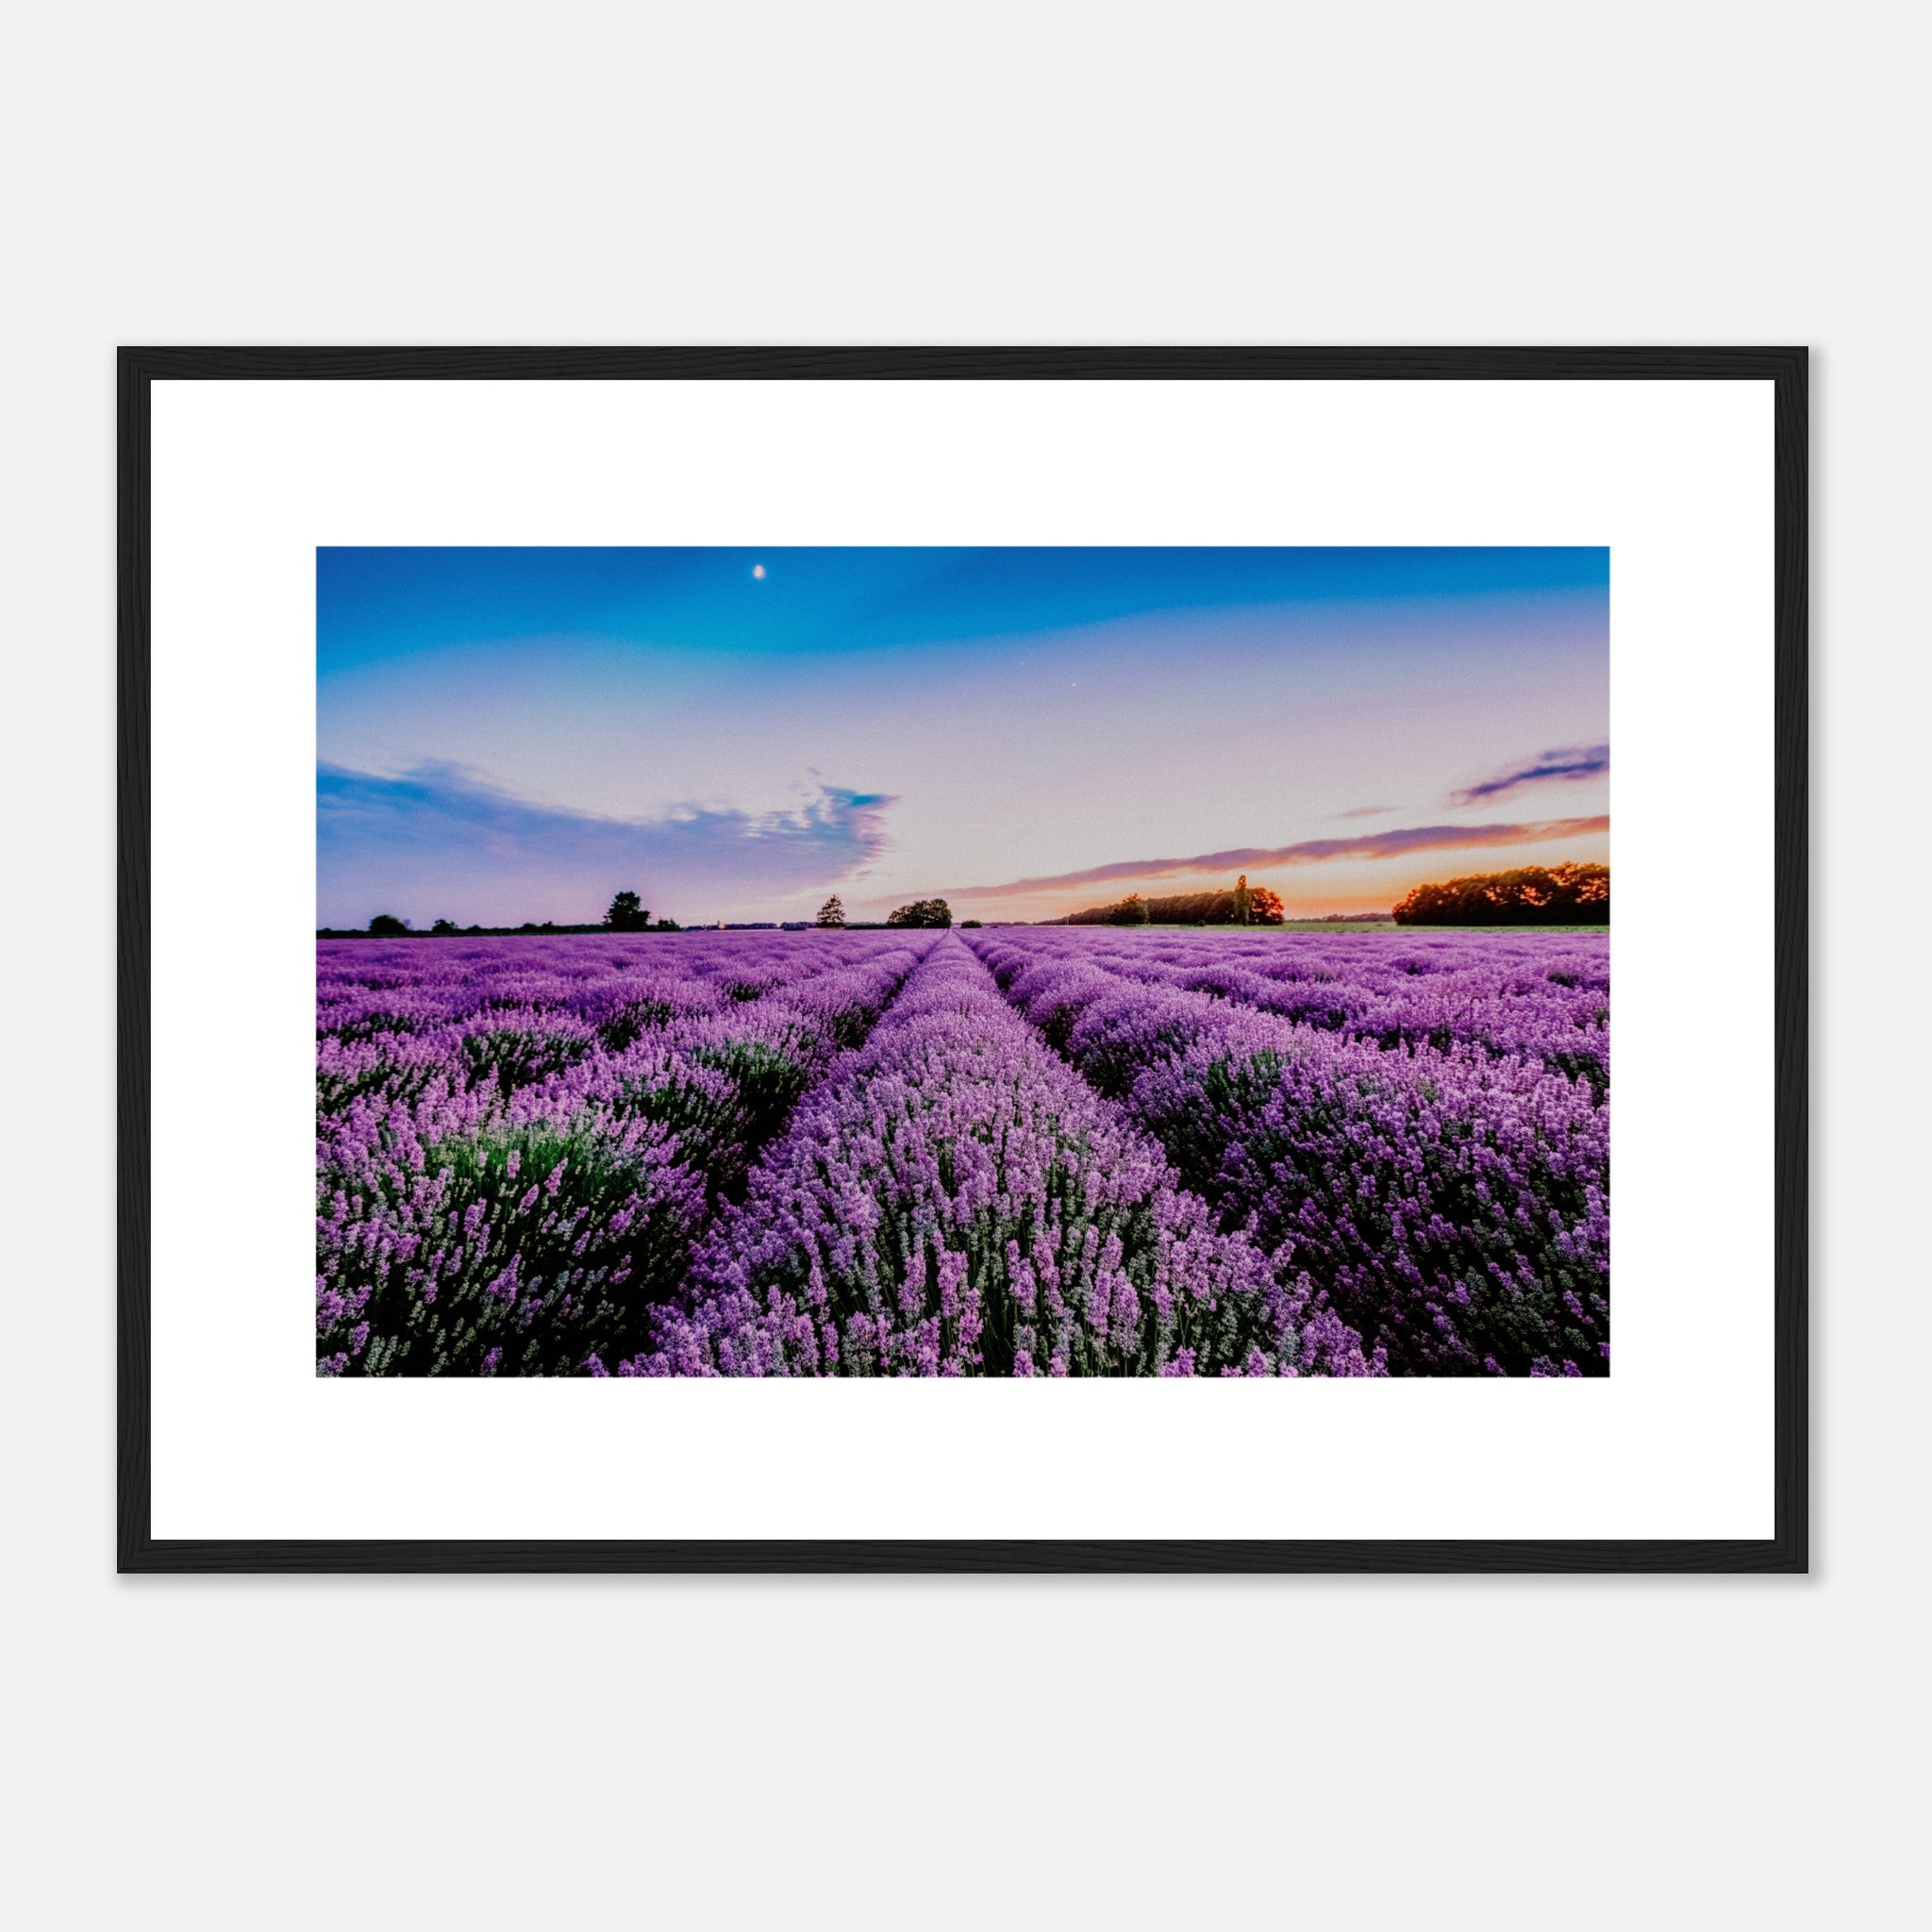 Sunrise And Dramatic Clouds Over Lavender Field Poster